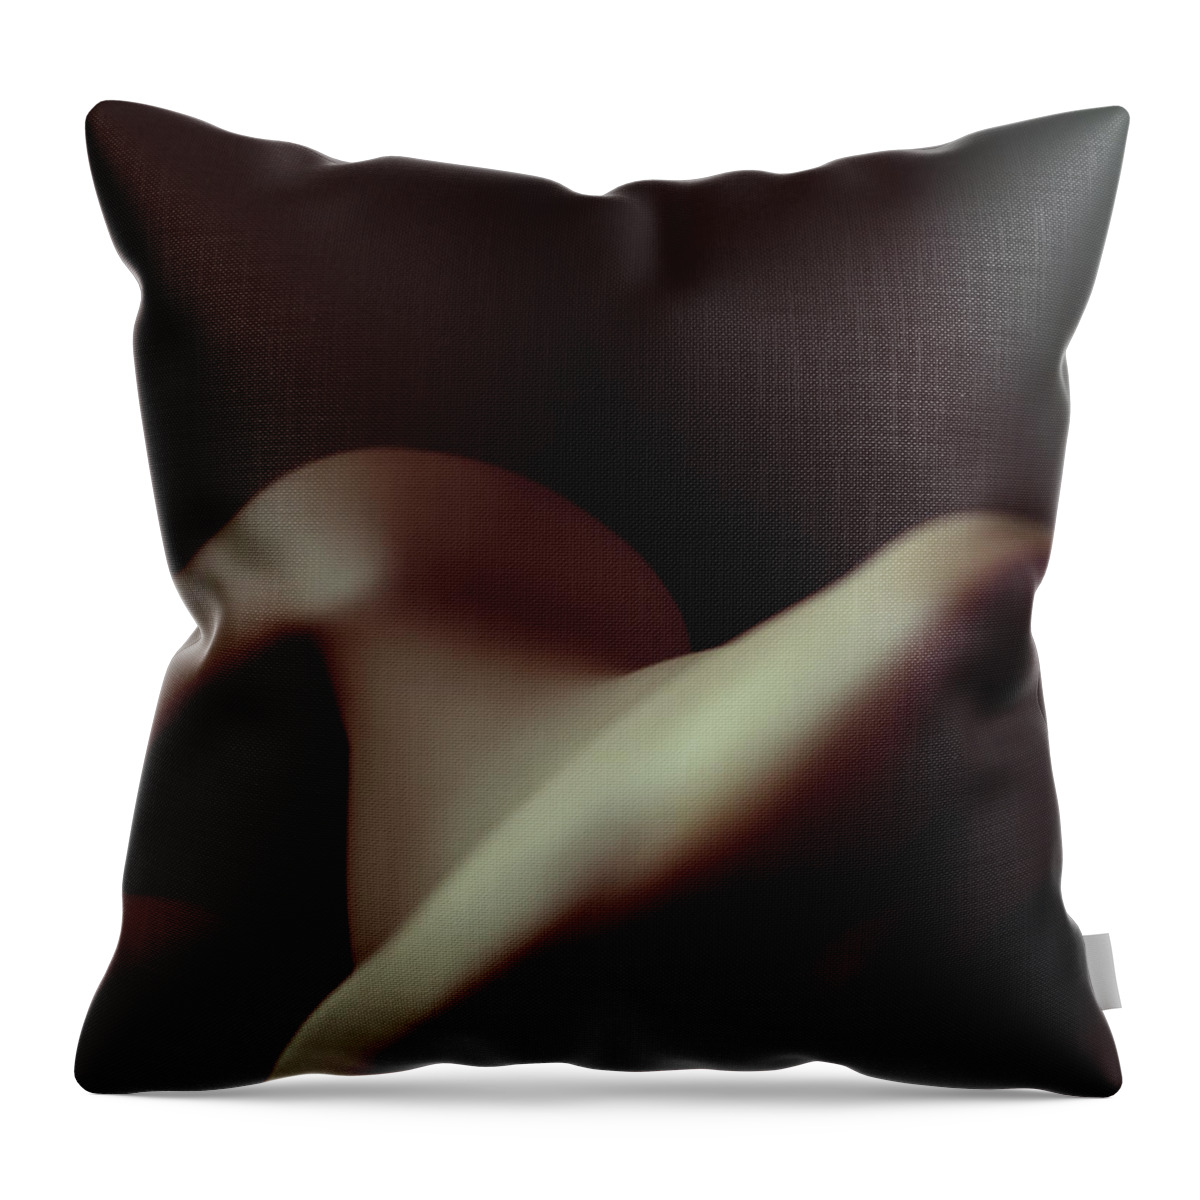 Torso Throw Pillow featuring the photograph Nude Woman In Partial Shadow by Jupiterimages